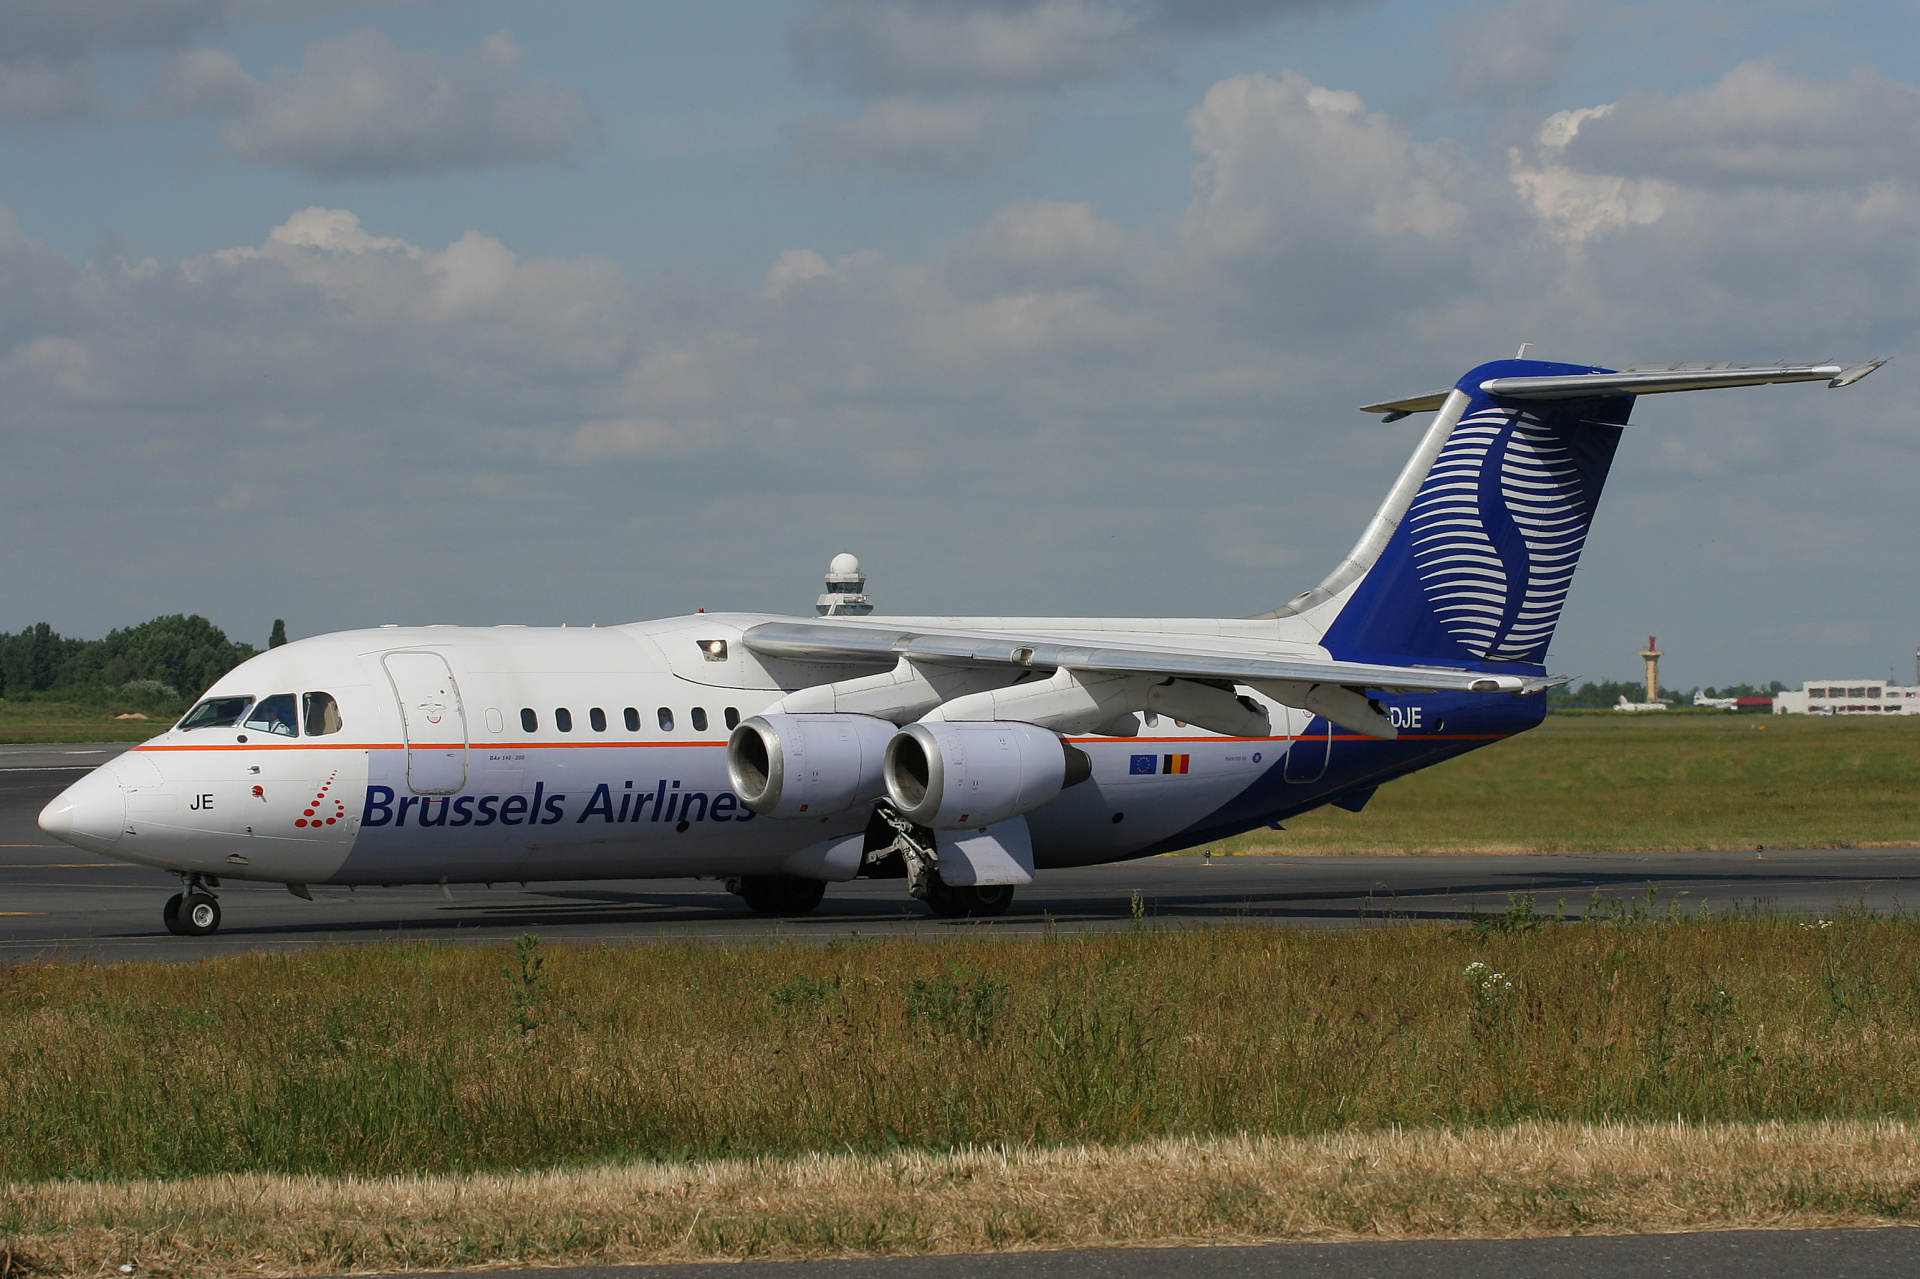 146-200, OO-DJE, Brussels Airlines (Sabena) (Aircraft » EPWA Spotting » BAe 146 and revisions)